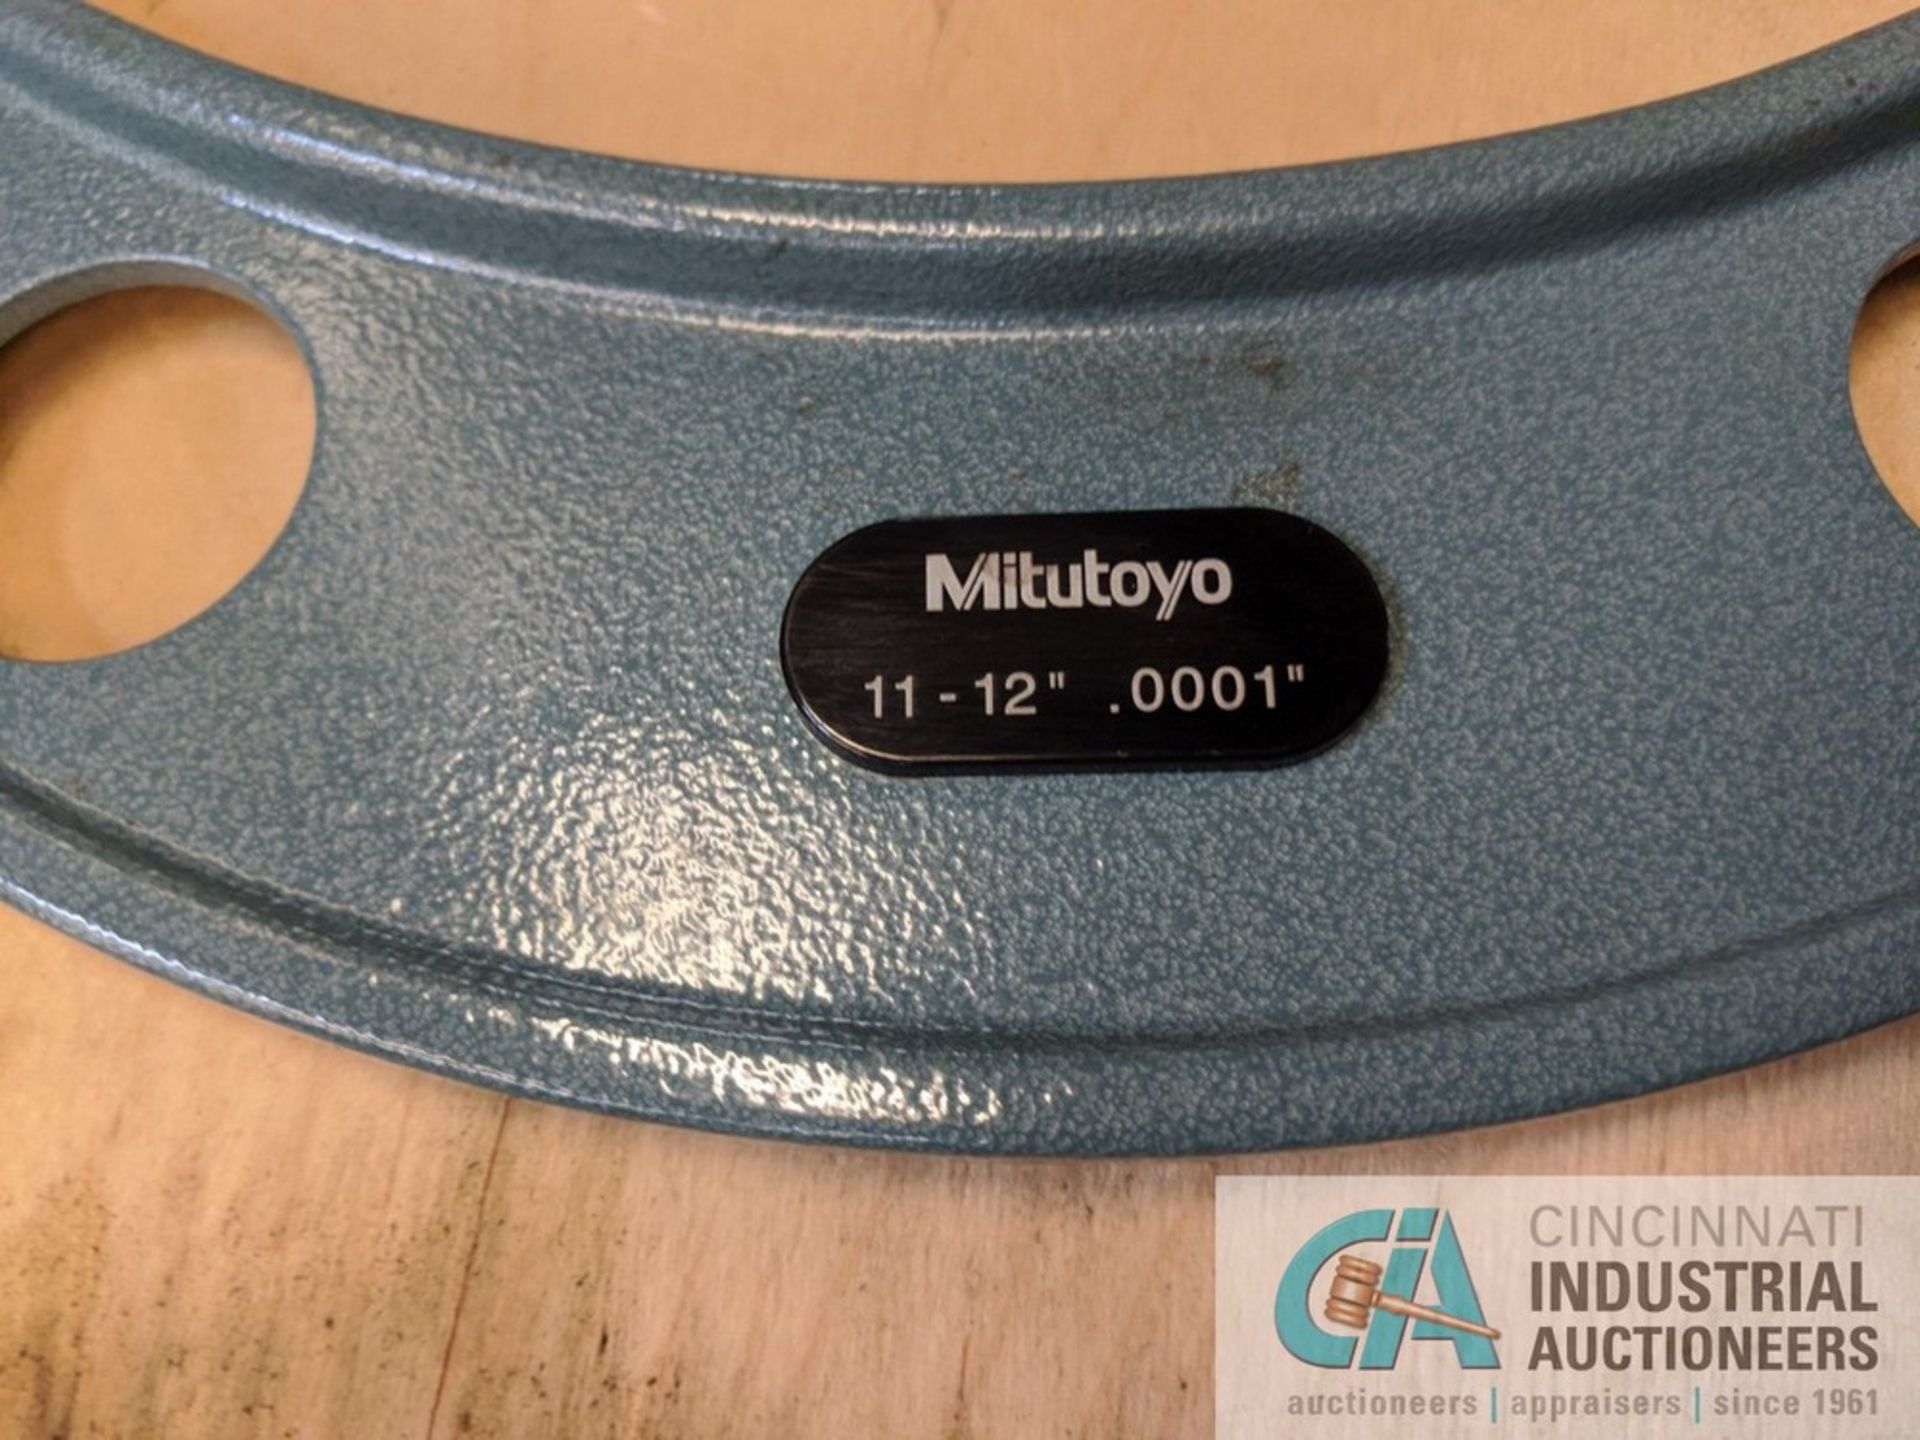 MITUTOYO O.D. MICROMETER SET - 6 PIECES (6-7, 7-8, 8-9, 9-10, 10-11, 11-12) - Image 2 of 4